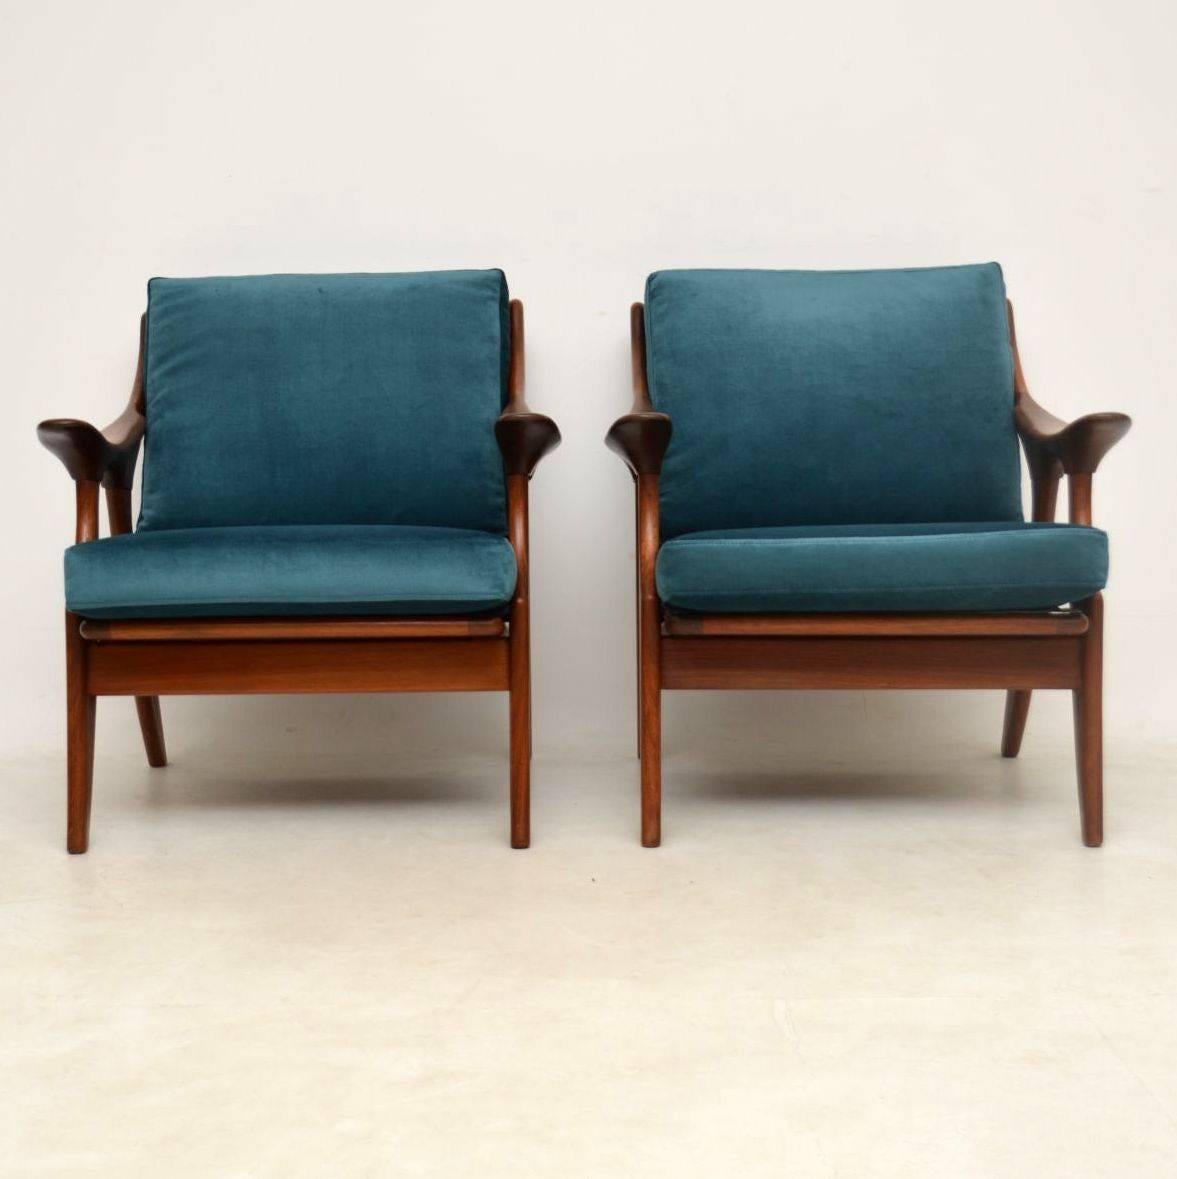 A stunning and extremely rare pair of vintage armchairs, these were made in Holland by De Ster Gelderland, they date from the 1960s. They have a stunning design and are very comfortable, the condition is excellent for their age. We have had the